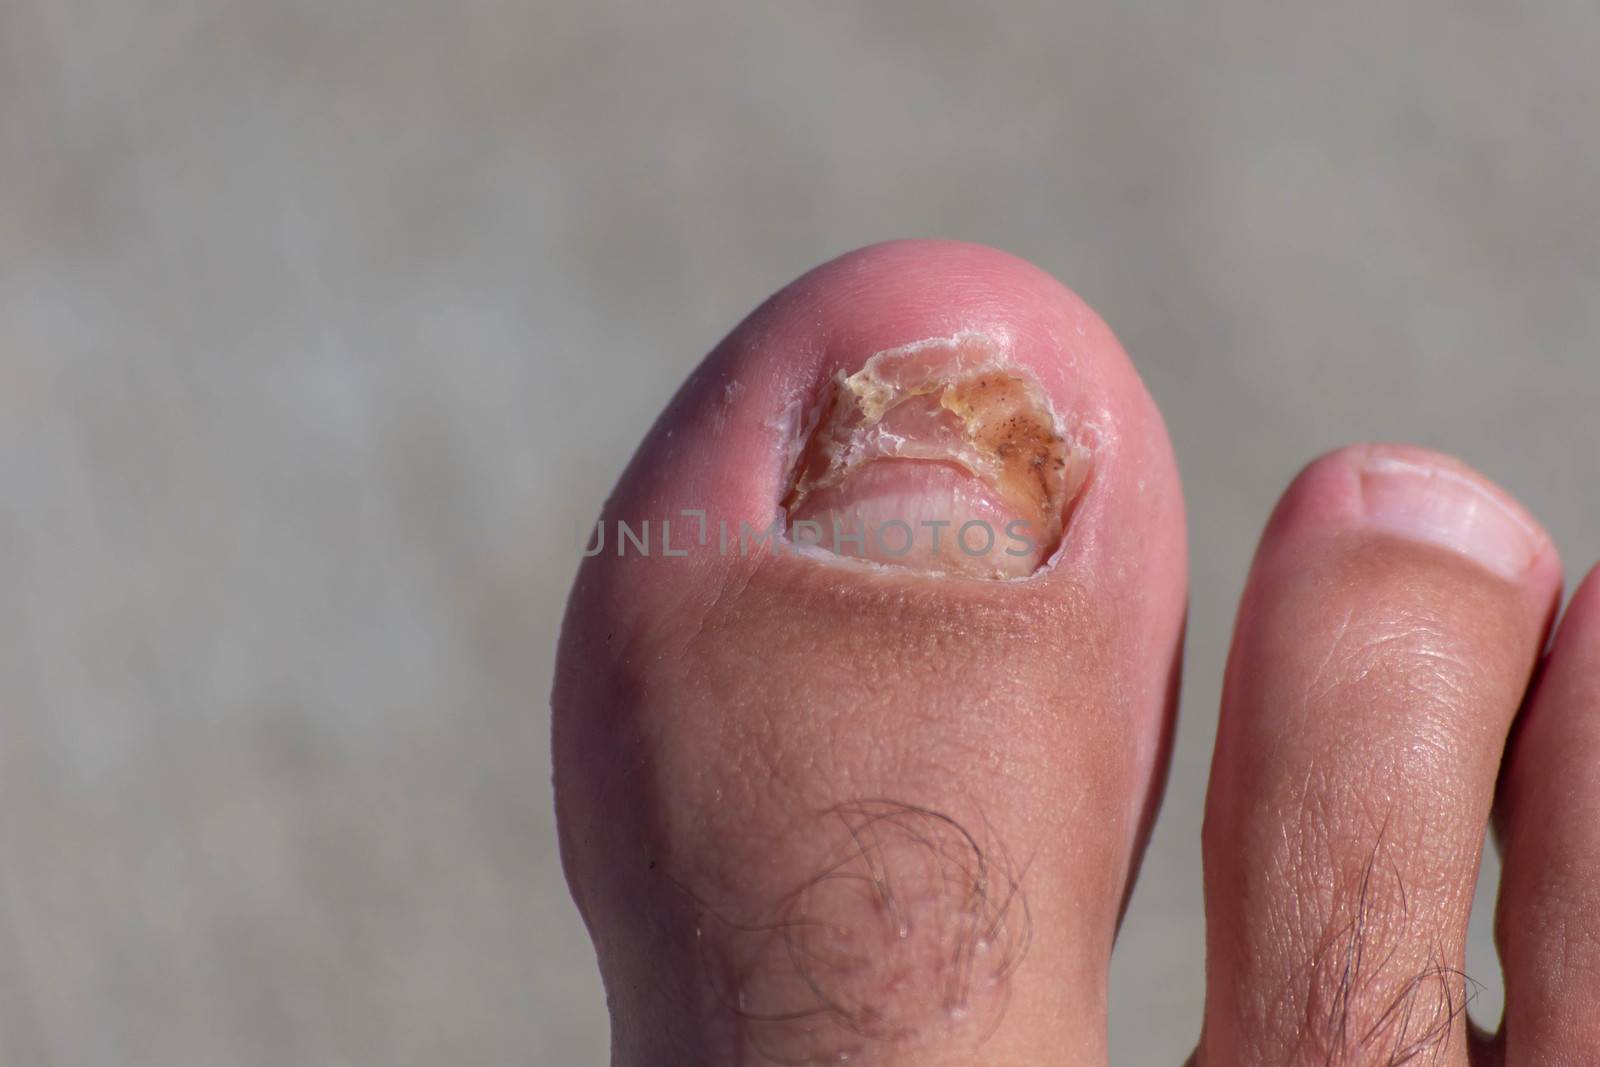 Big toe nail broken off and growing back after an injury. by kingmaphotos